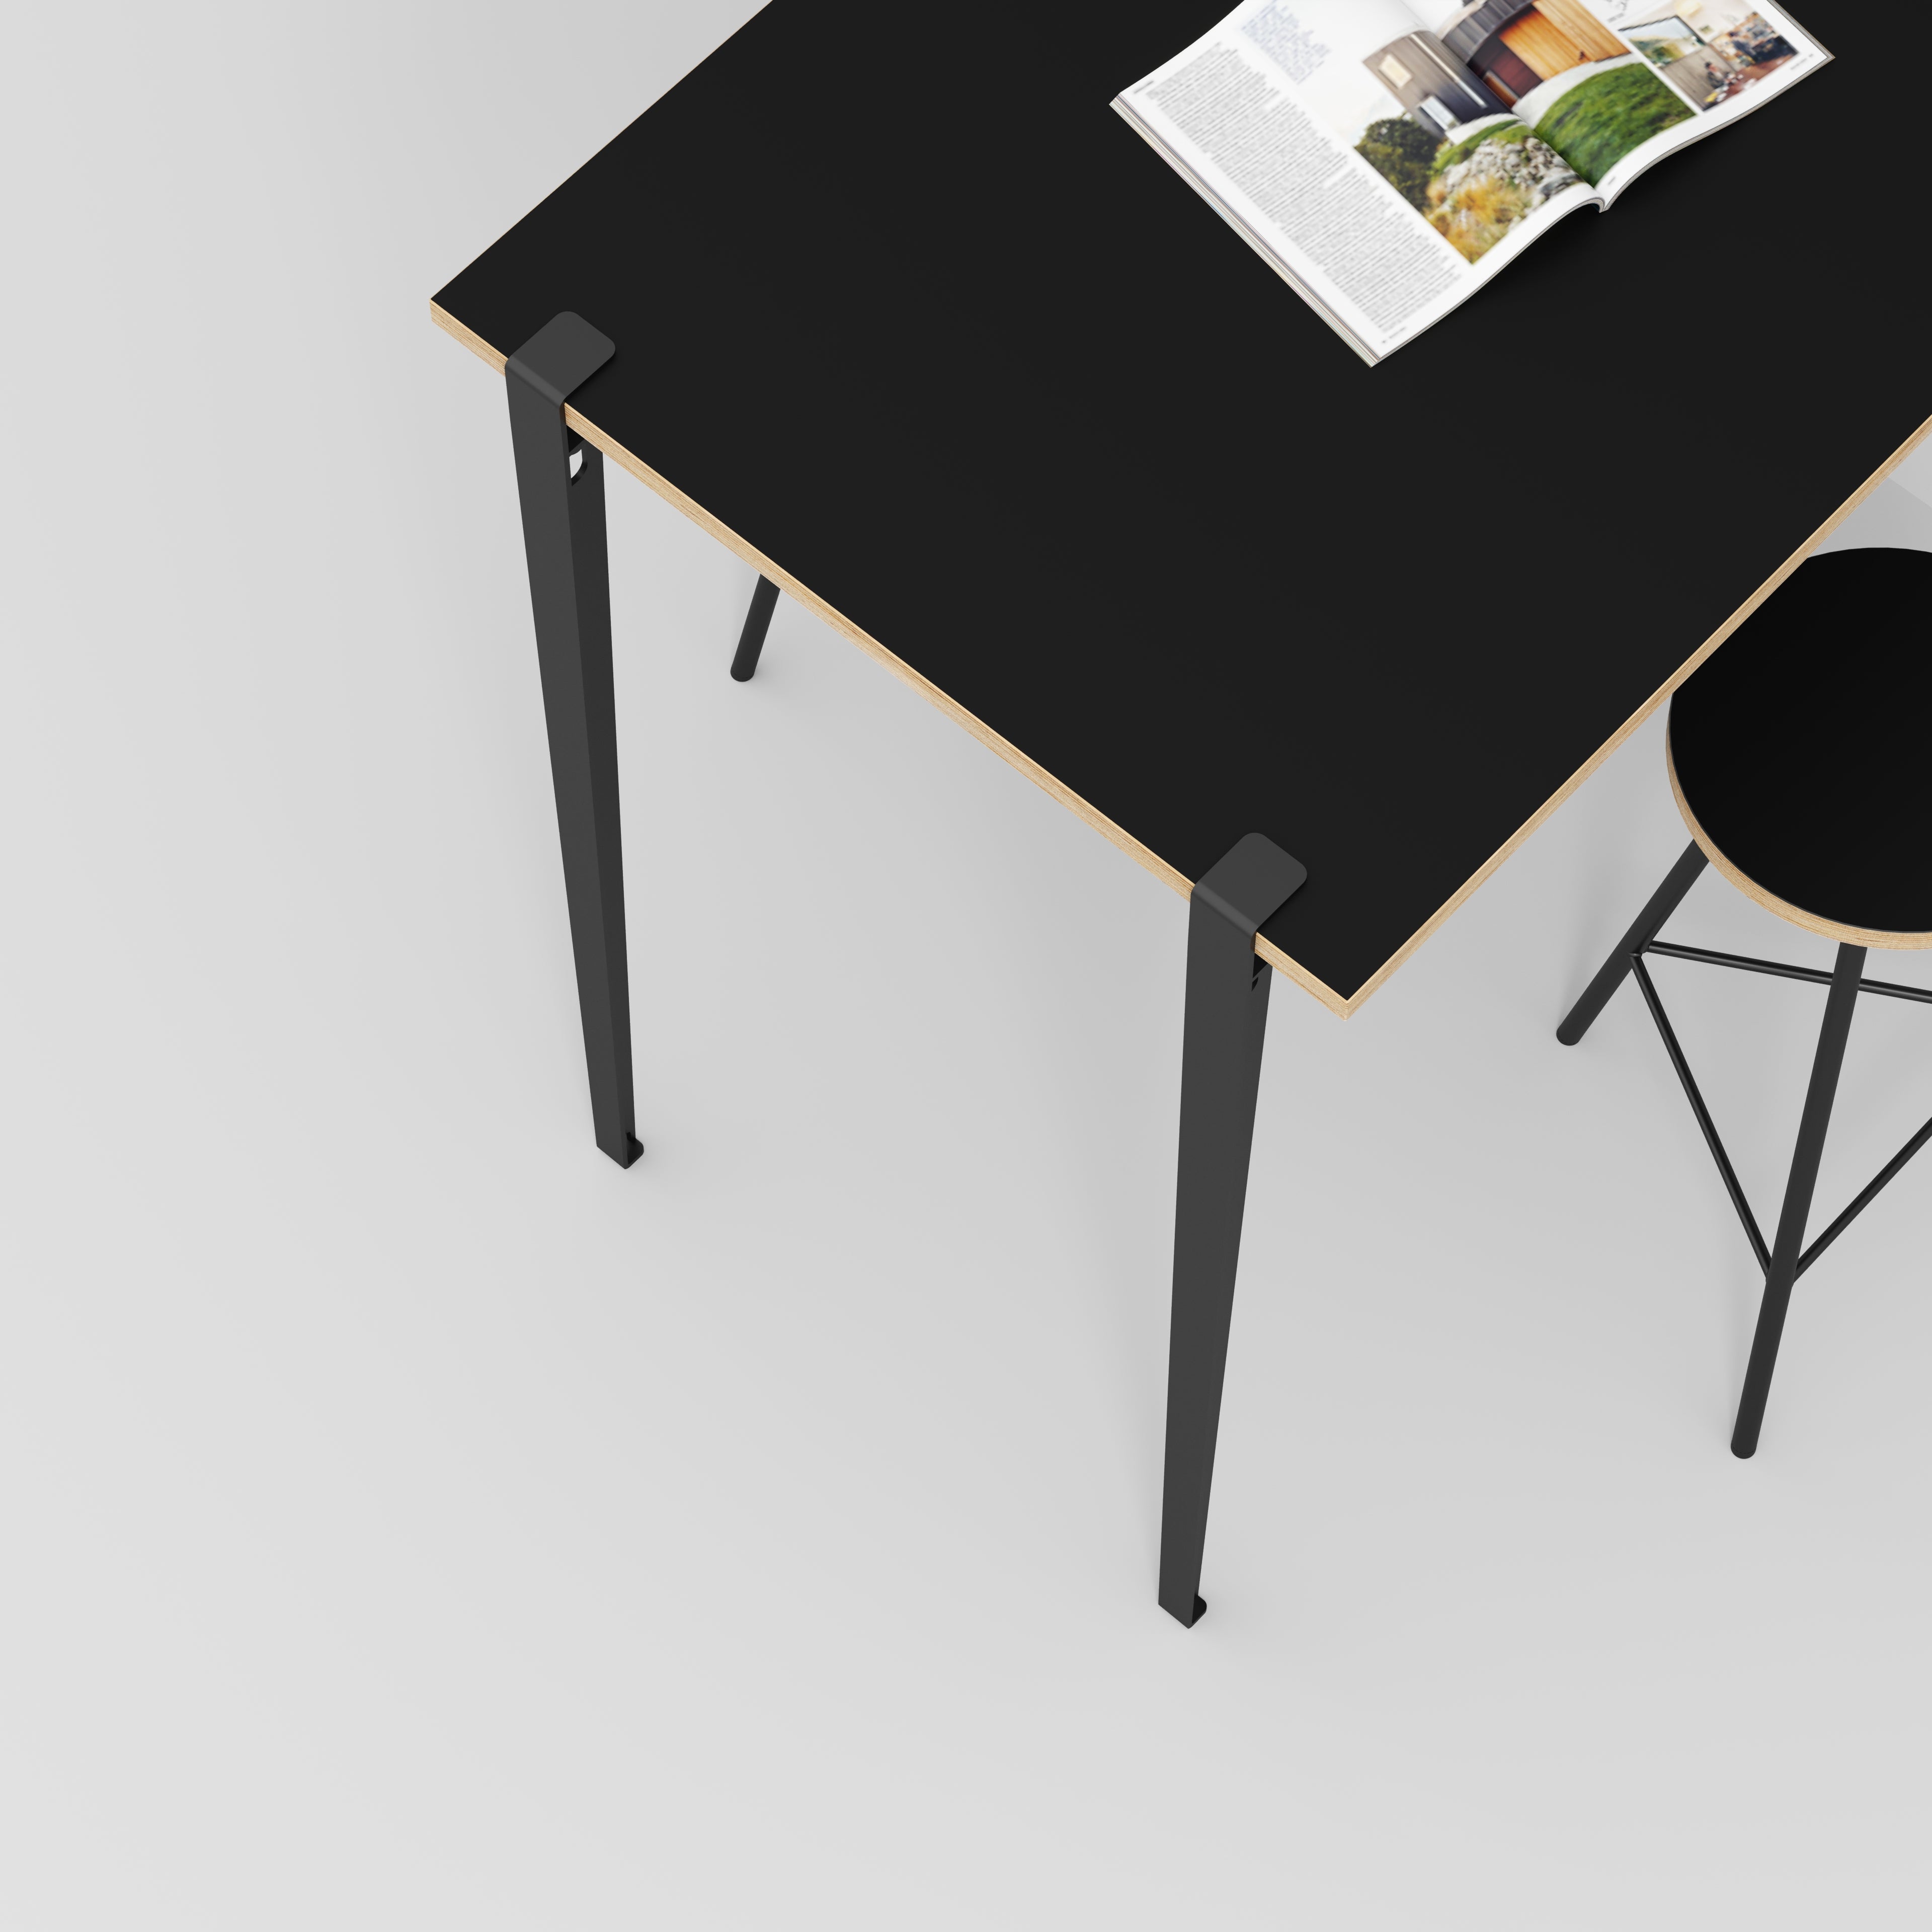 Wall Table with Black Tiptoe Legs and Brackets - Formica Diamond Black - 1200(w) x 800(d) x 1100(h)